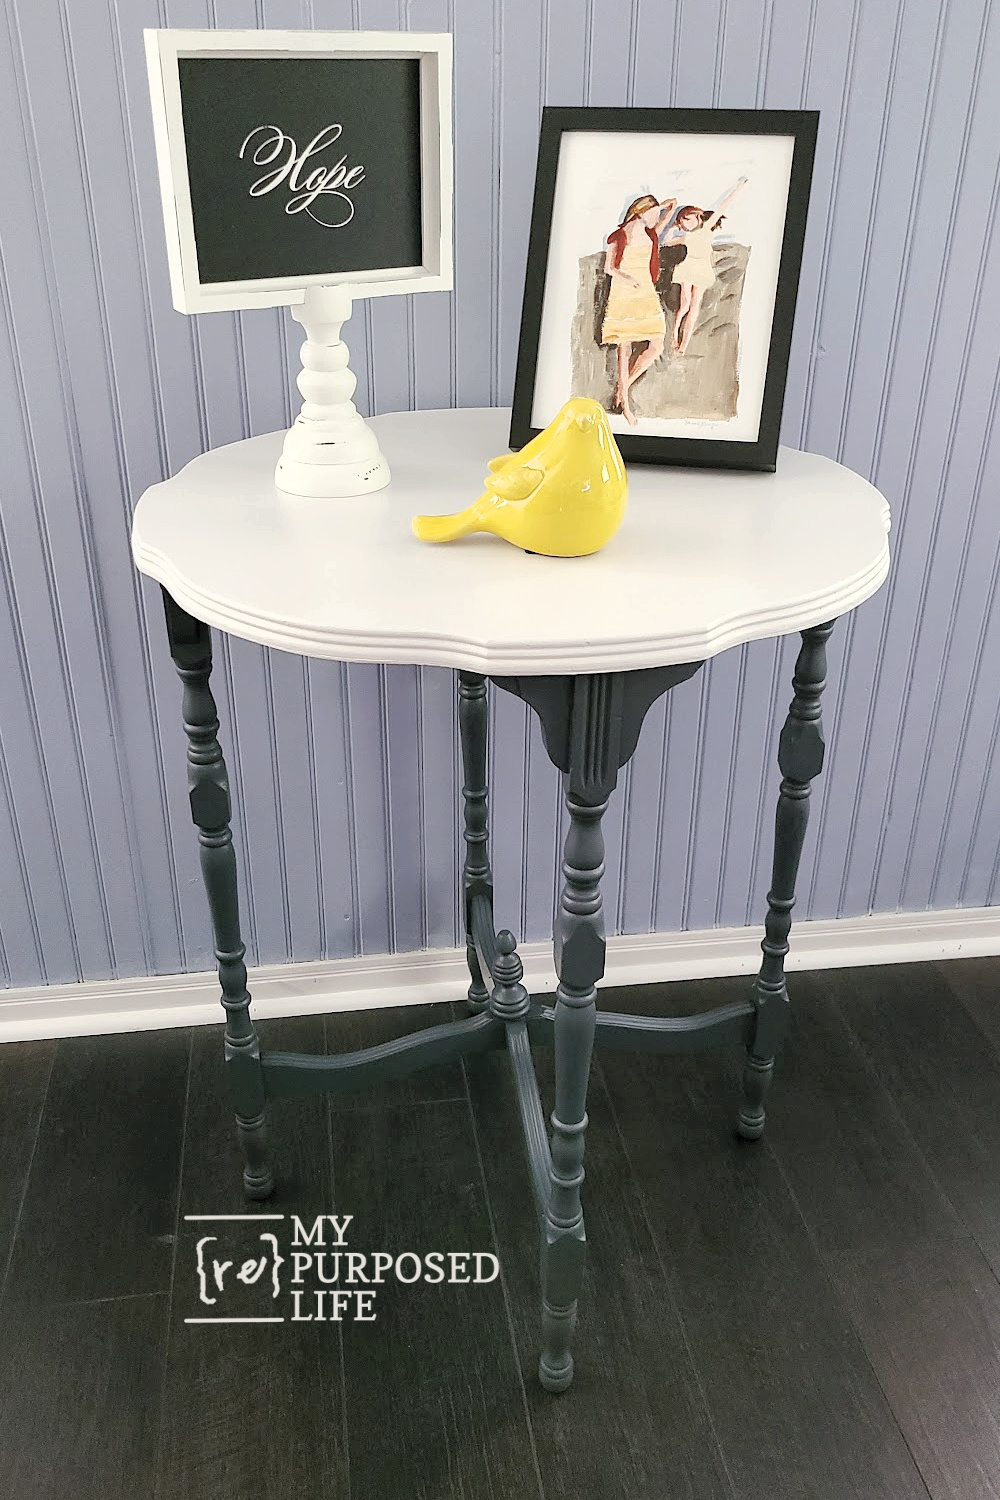 Don't throw out that antique side table. With a little paint, you can have a new two toned table, perfect for any corner in your home. #MyRepurposedLife #antique #sidetable #makeover #furniture #htp via @repurposedlife